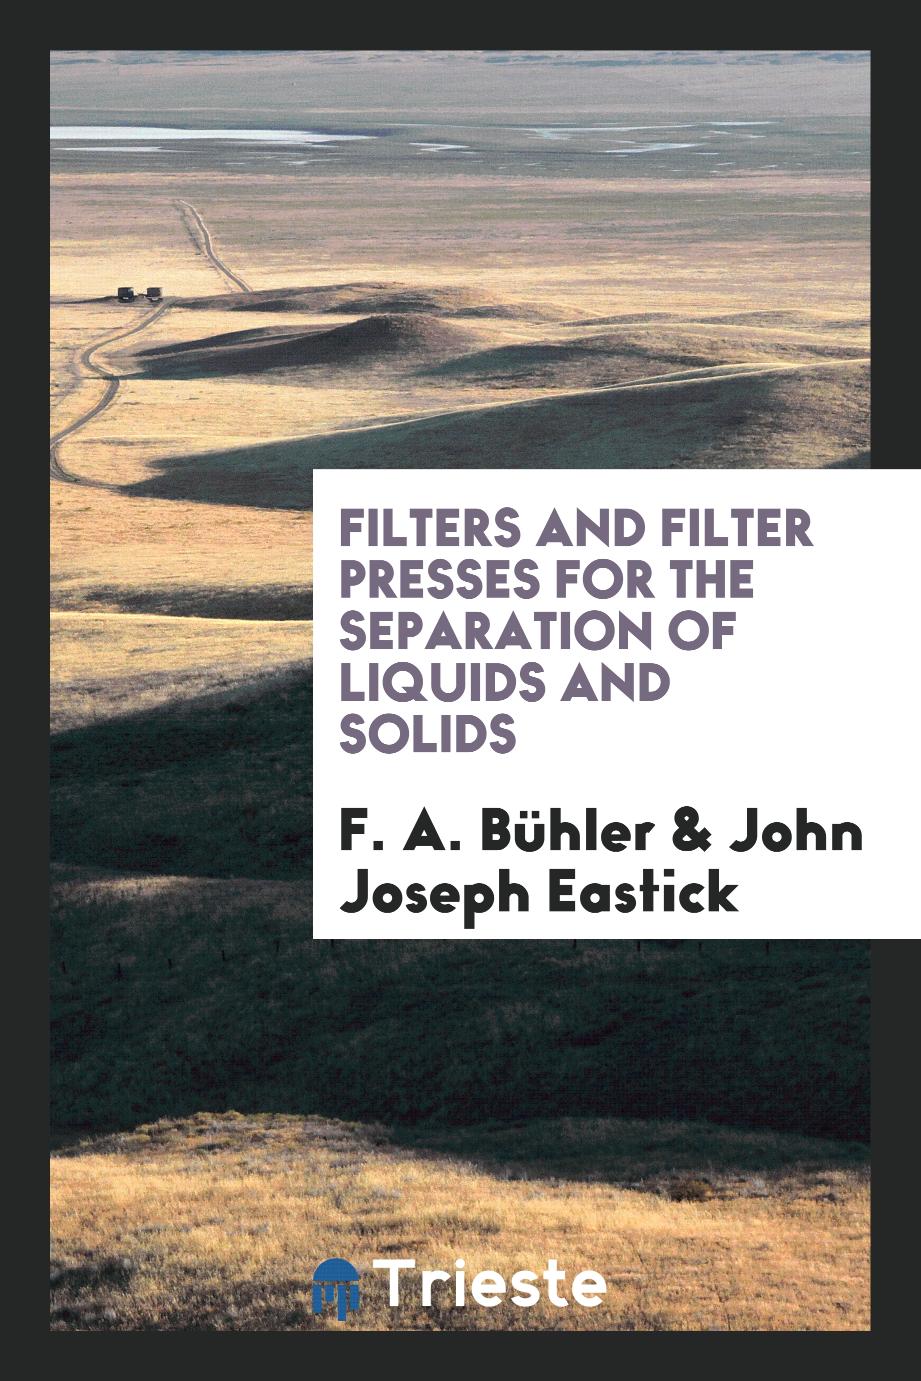 Filters and filter presses for the separation of liquids and solids